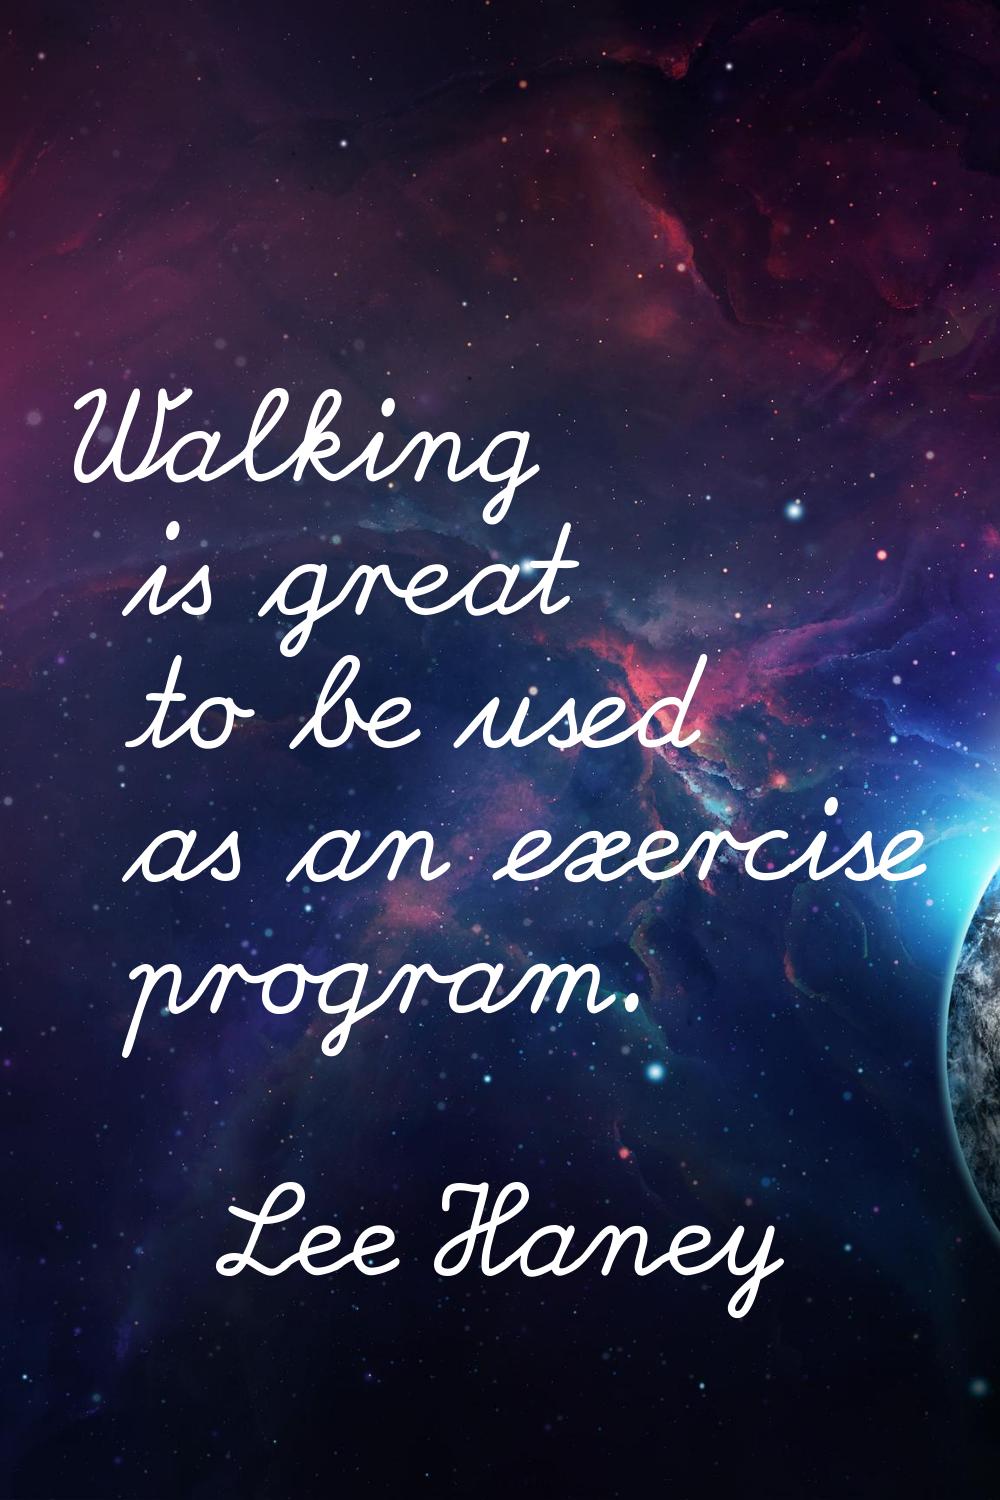 Walking is great to be used as an exercise program.